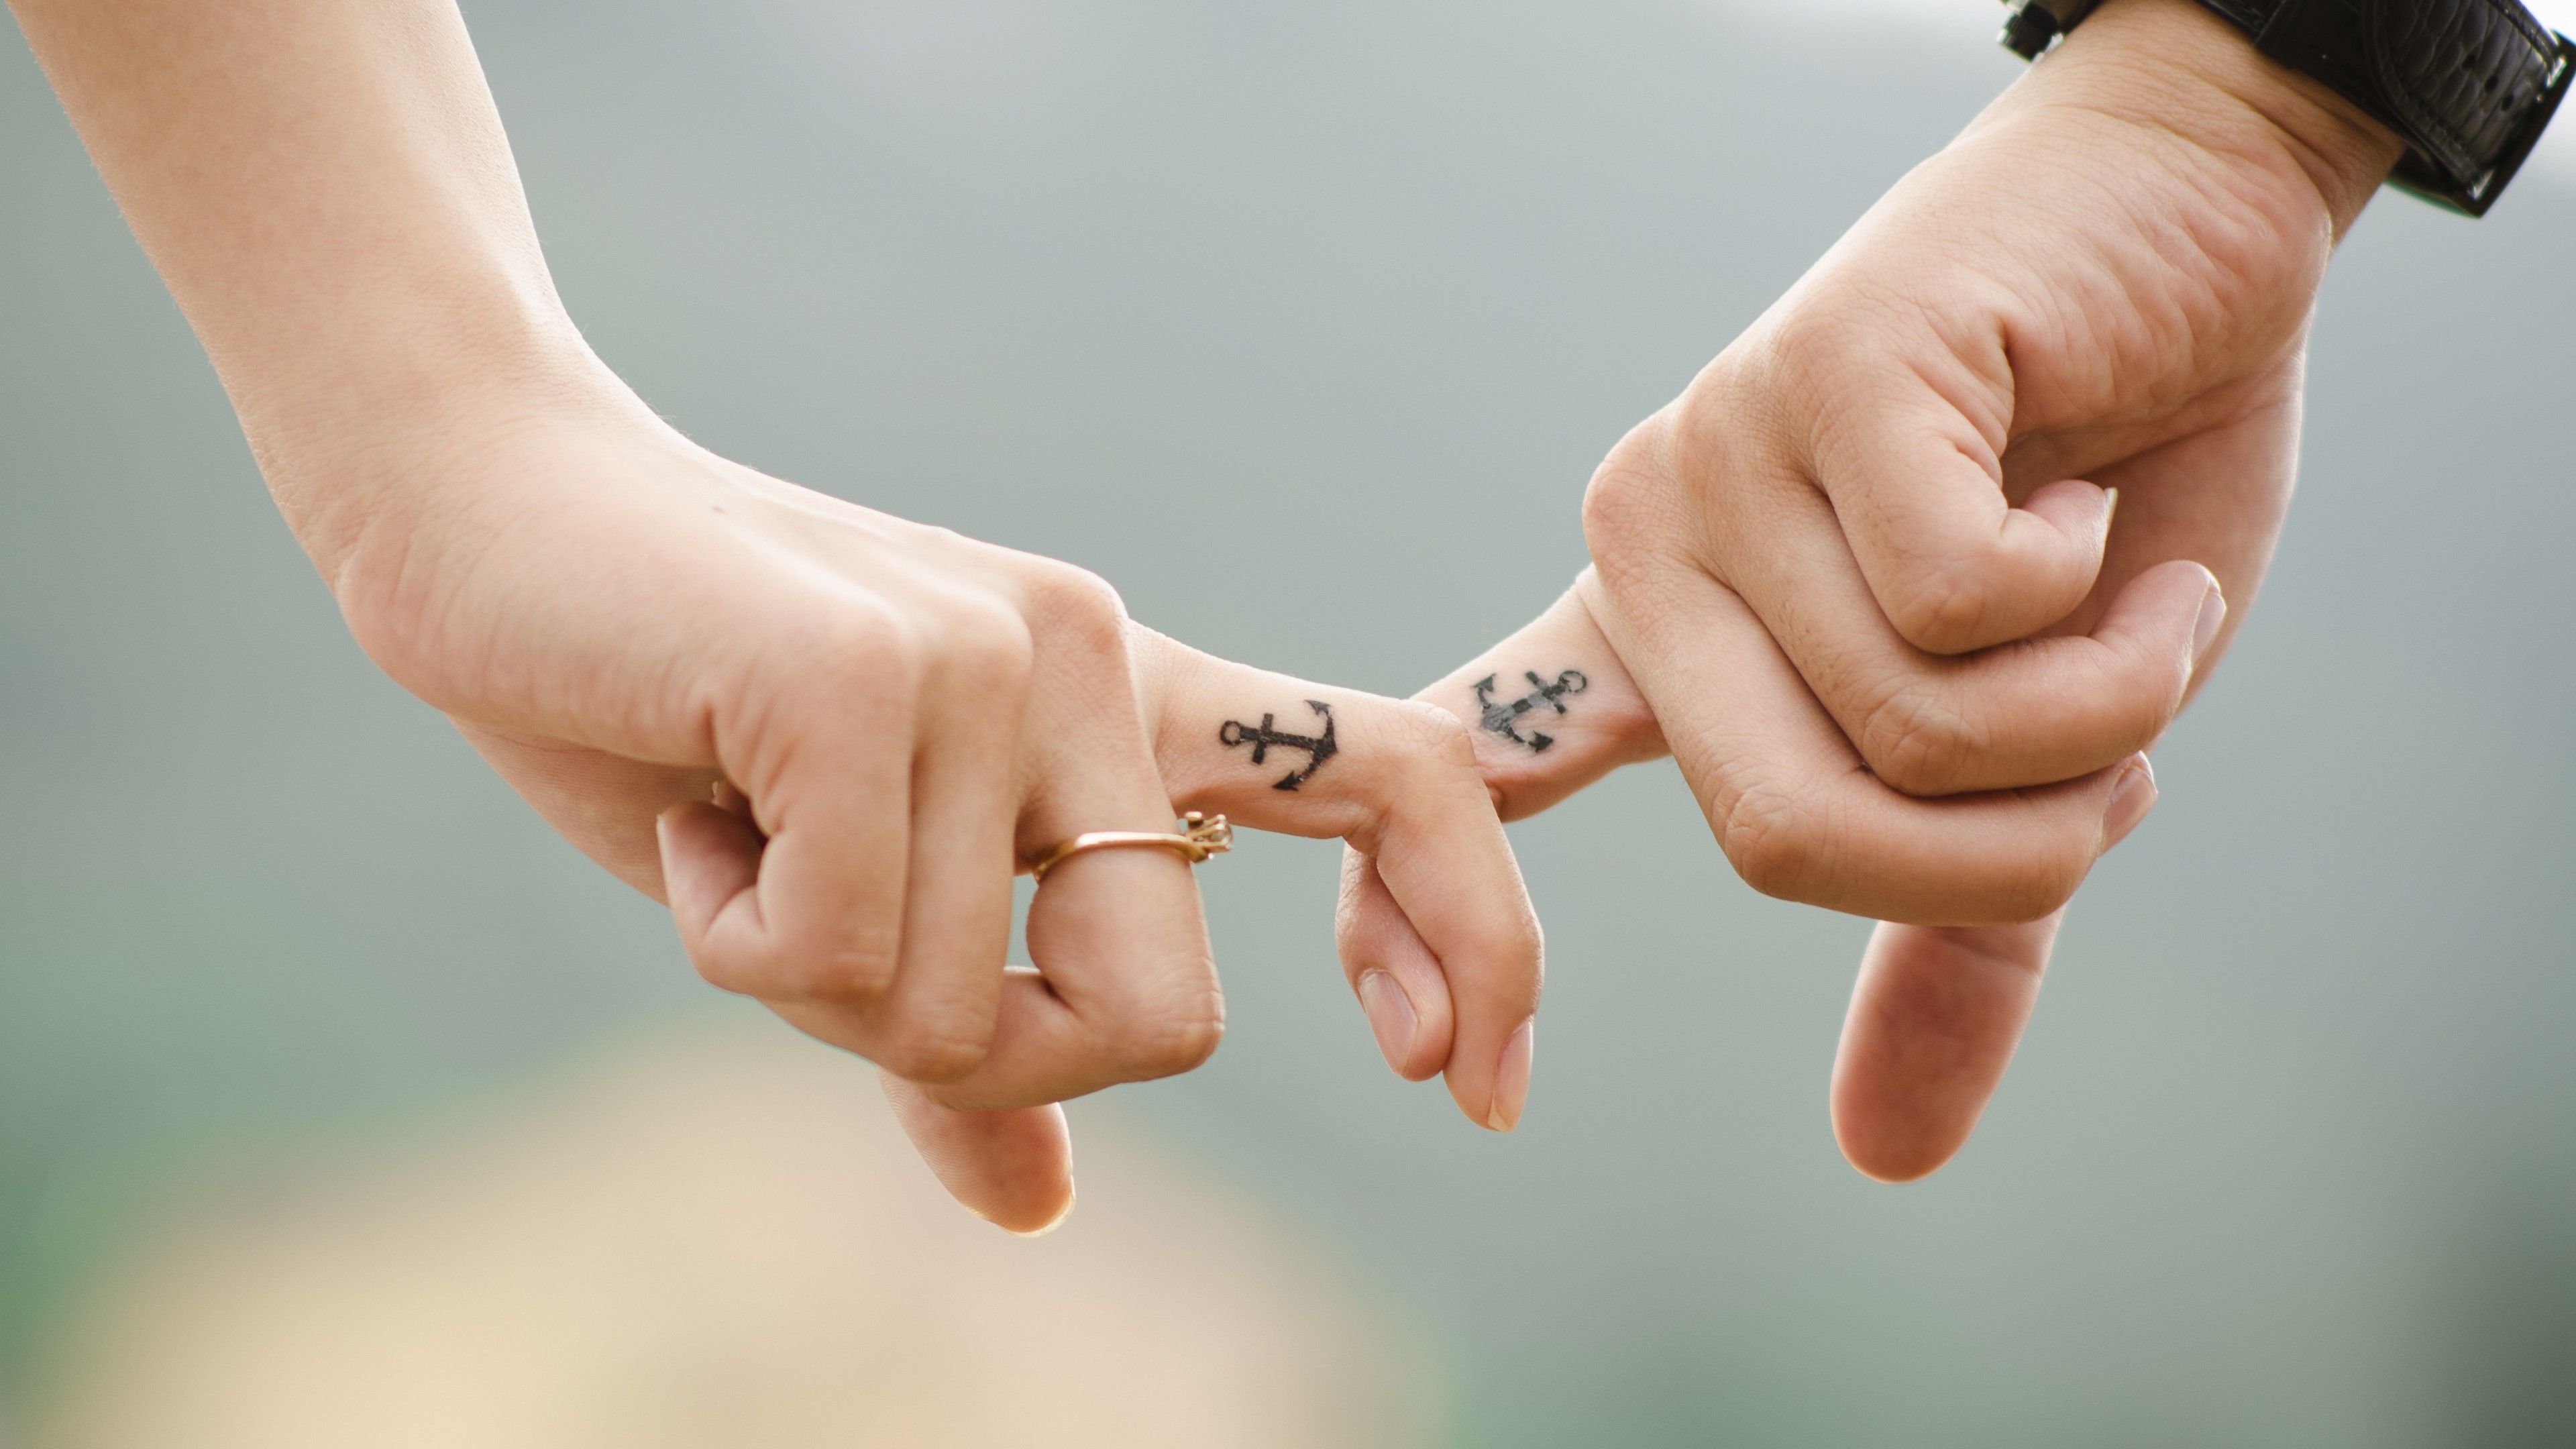 Couple 4K Wallpaper, Hands together, Fingers, Youth, Romantic, Lovers, 5K, Love